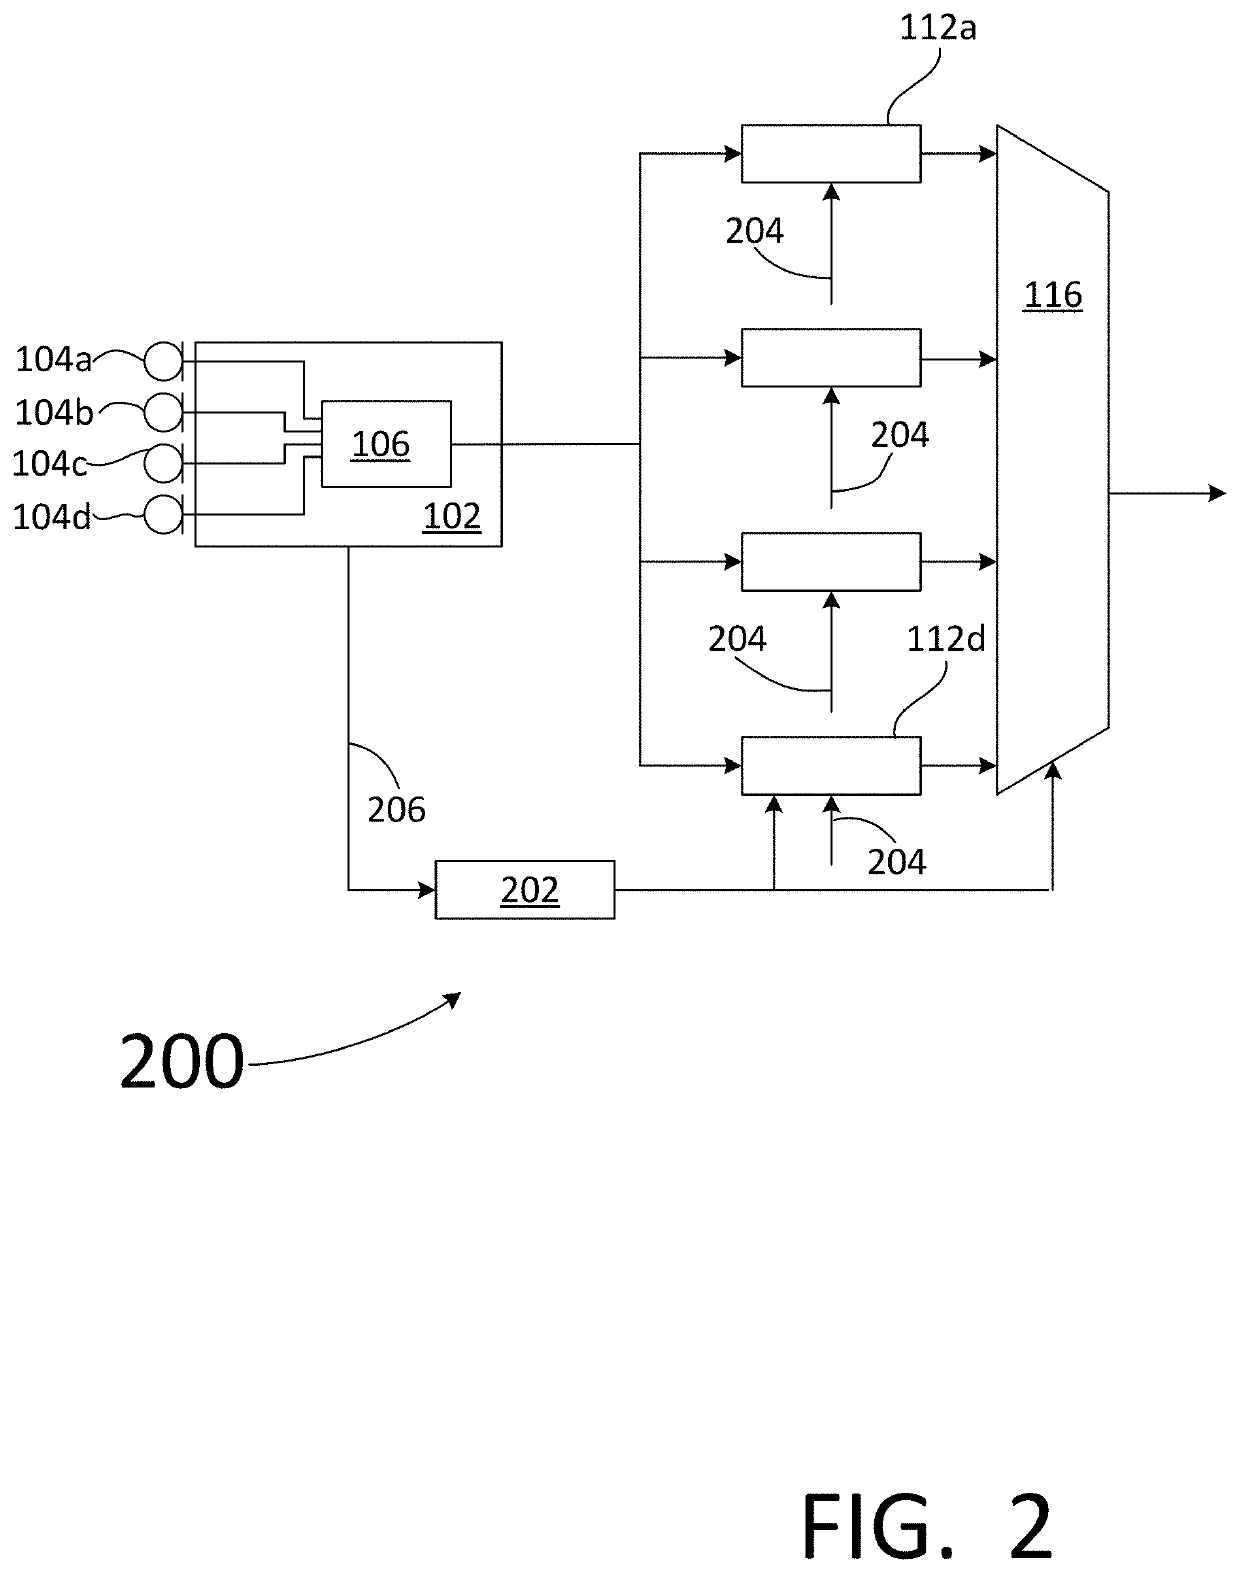 Adaptive beamforming microphone metadata transmission to coordinate acoustic echo cancellation in an audio conferencing sytem